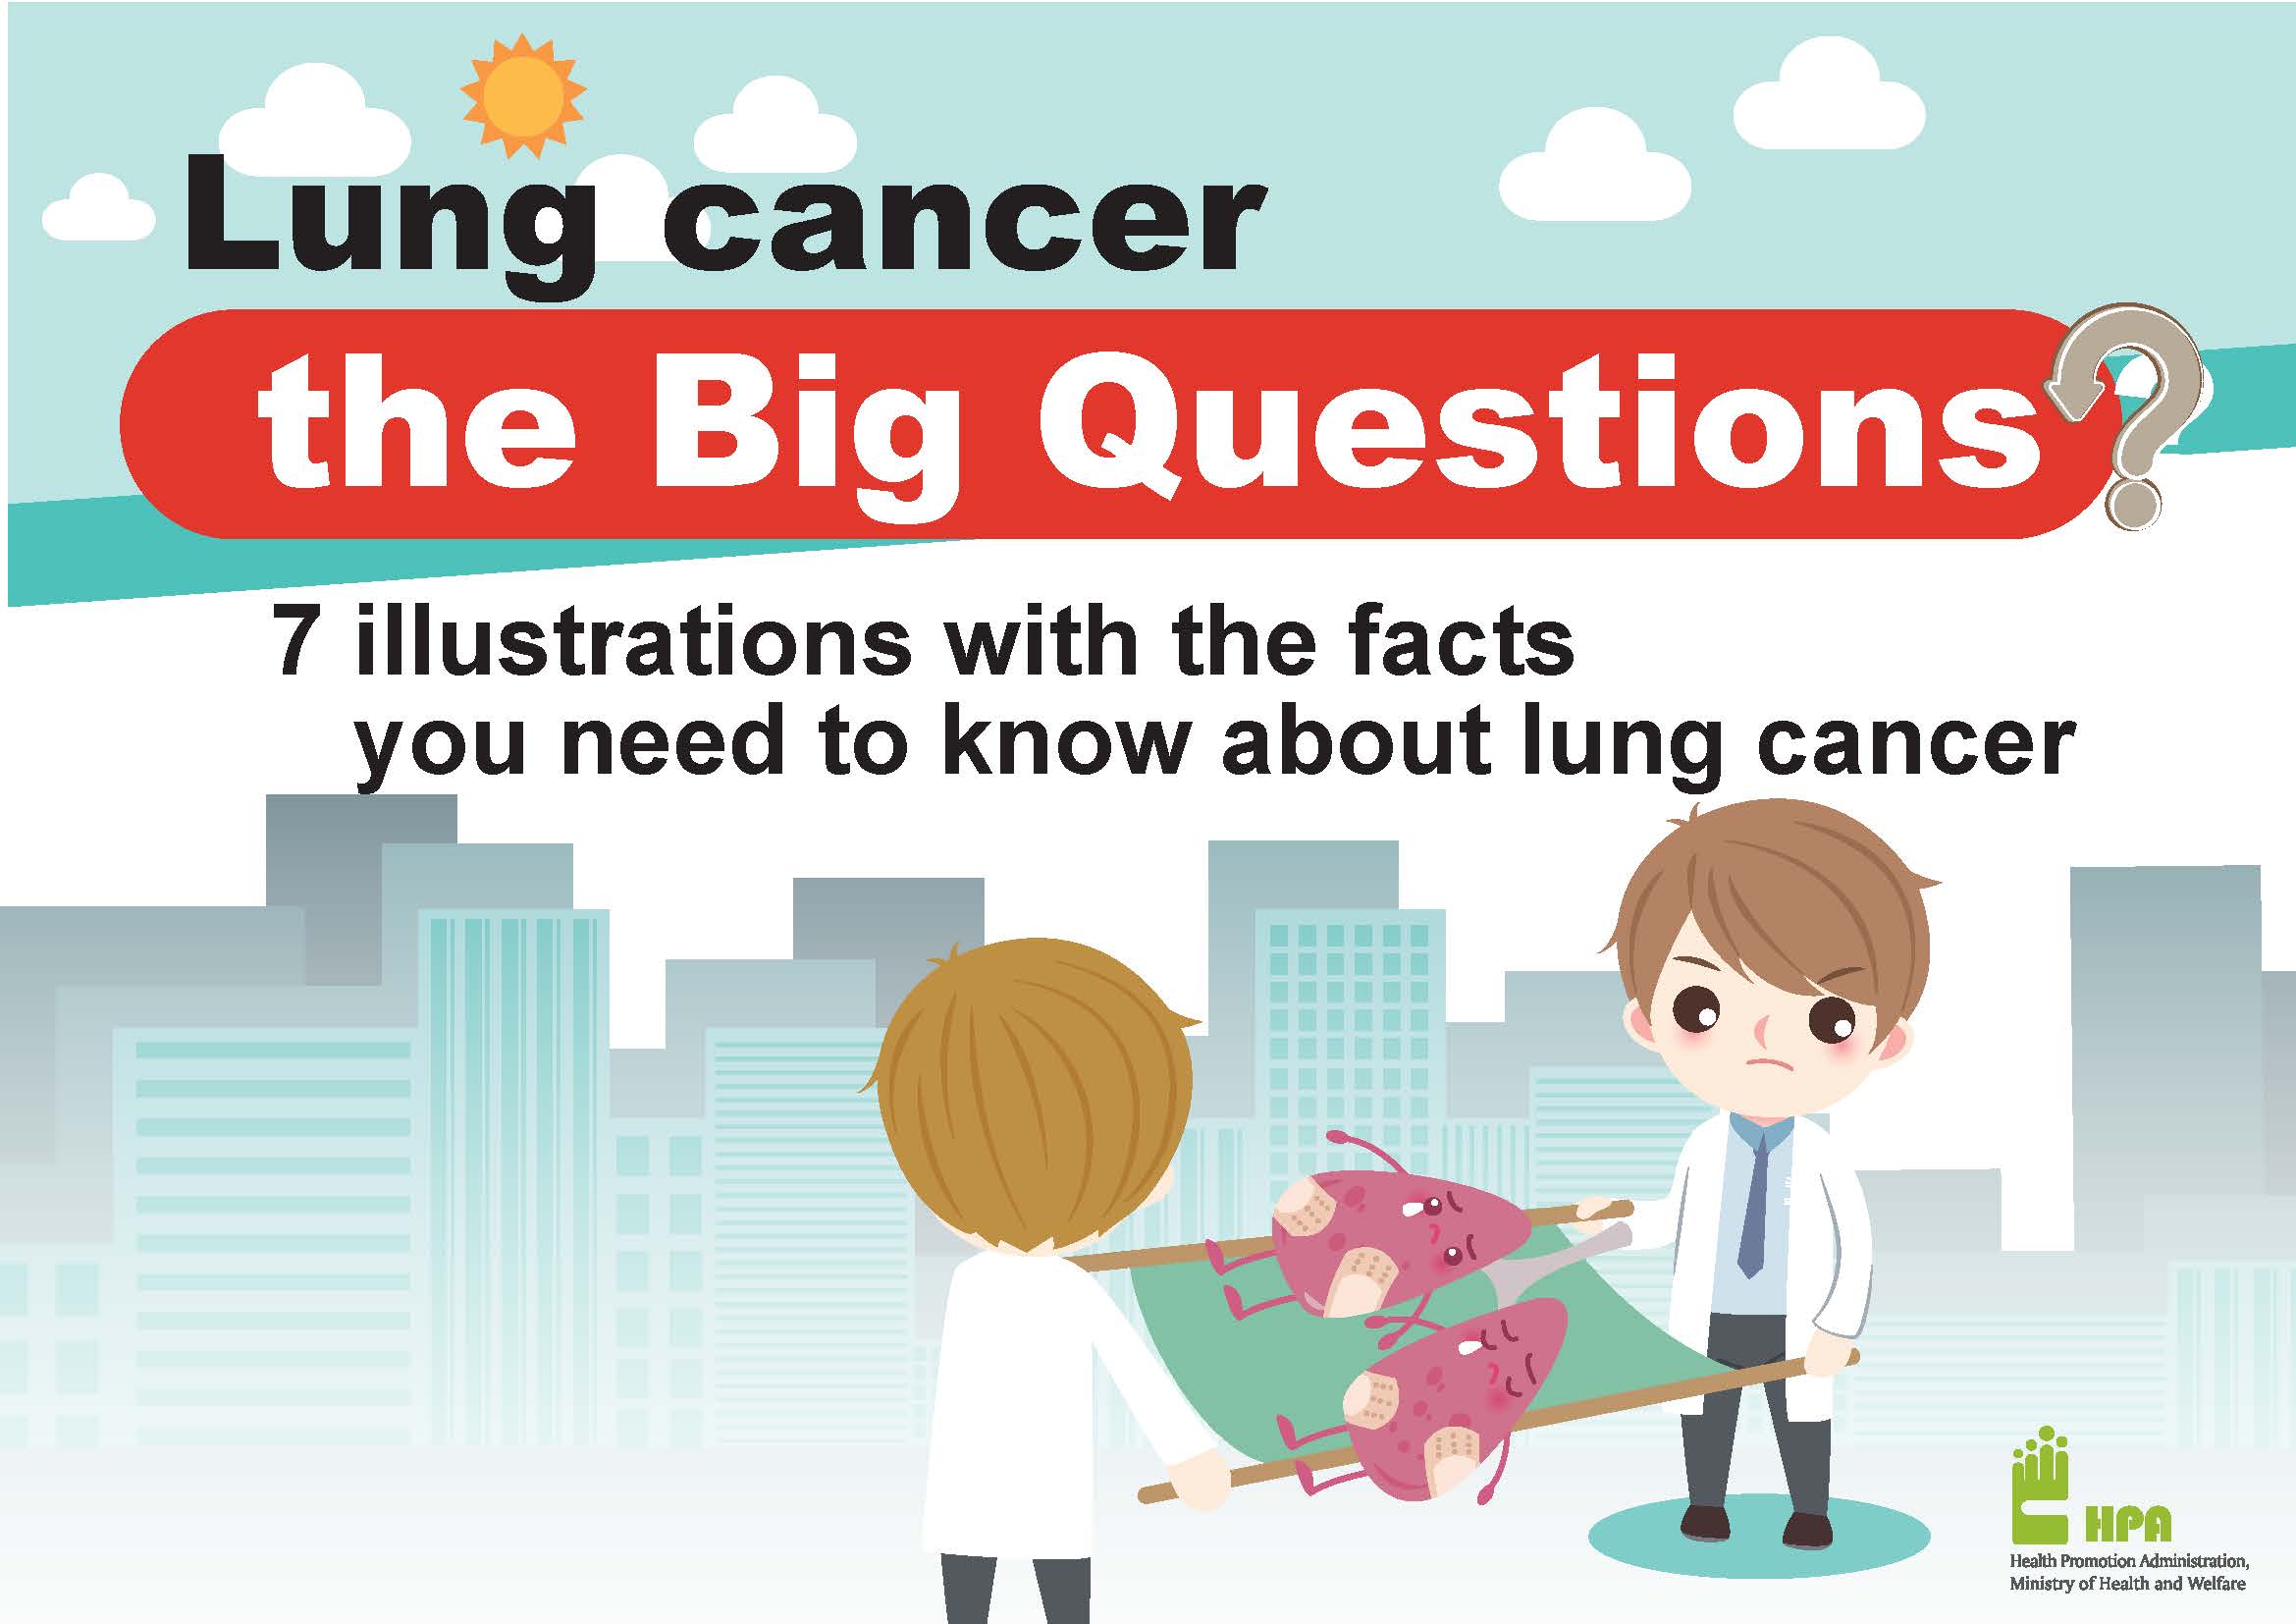 Lung cance- the Big Questions?